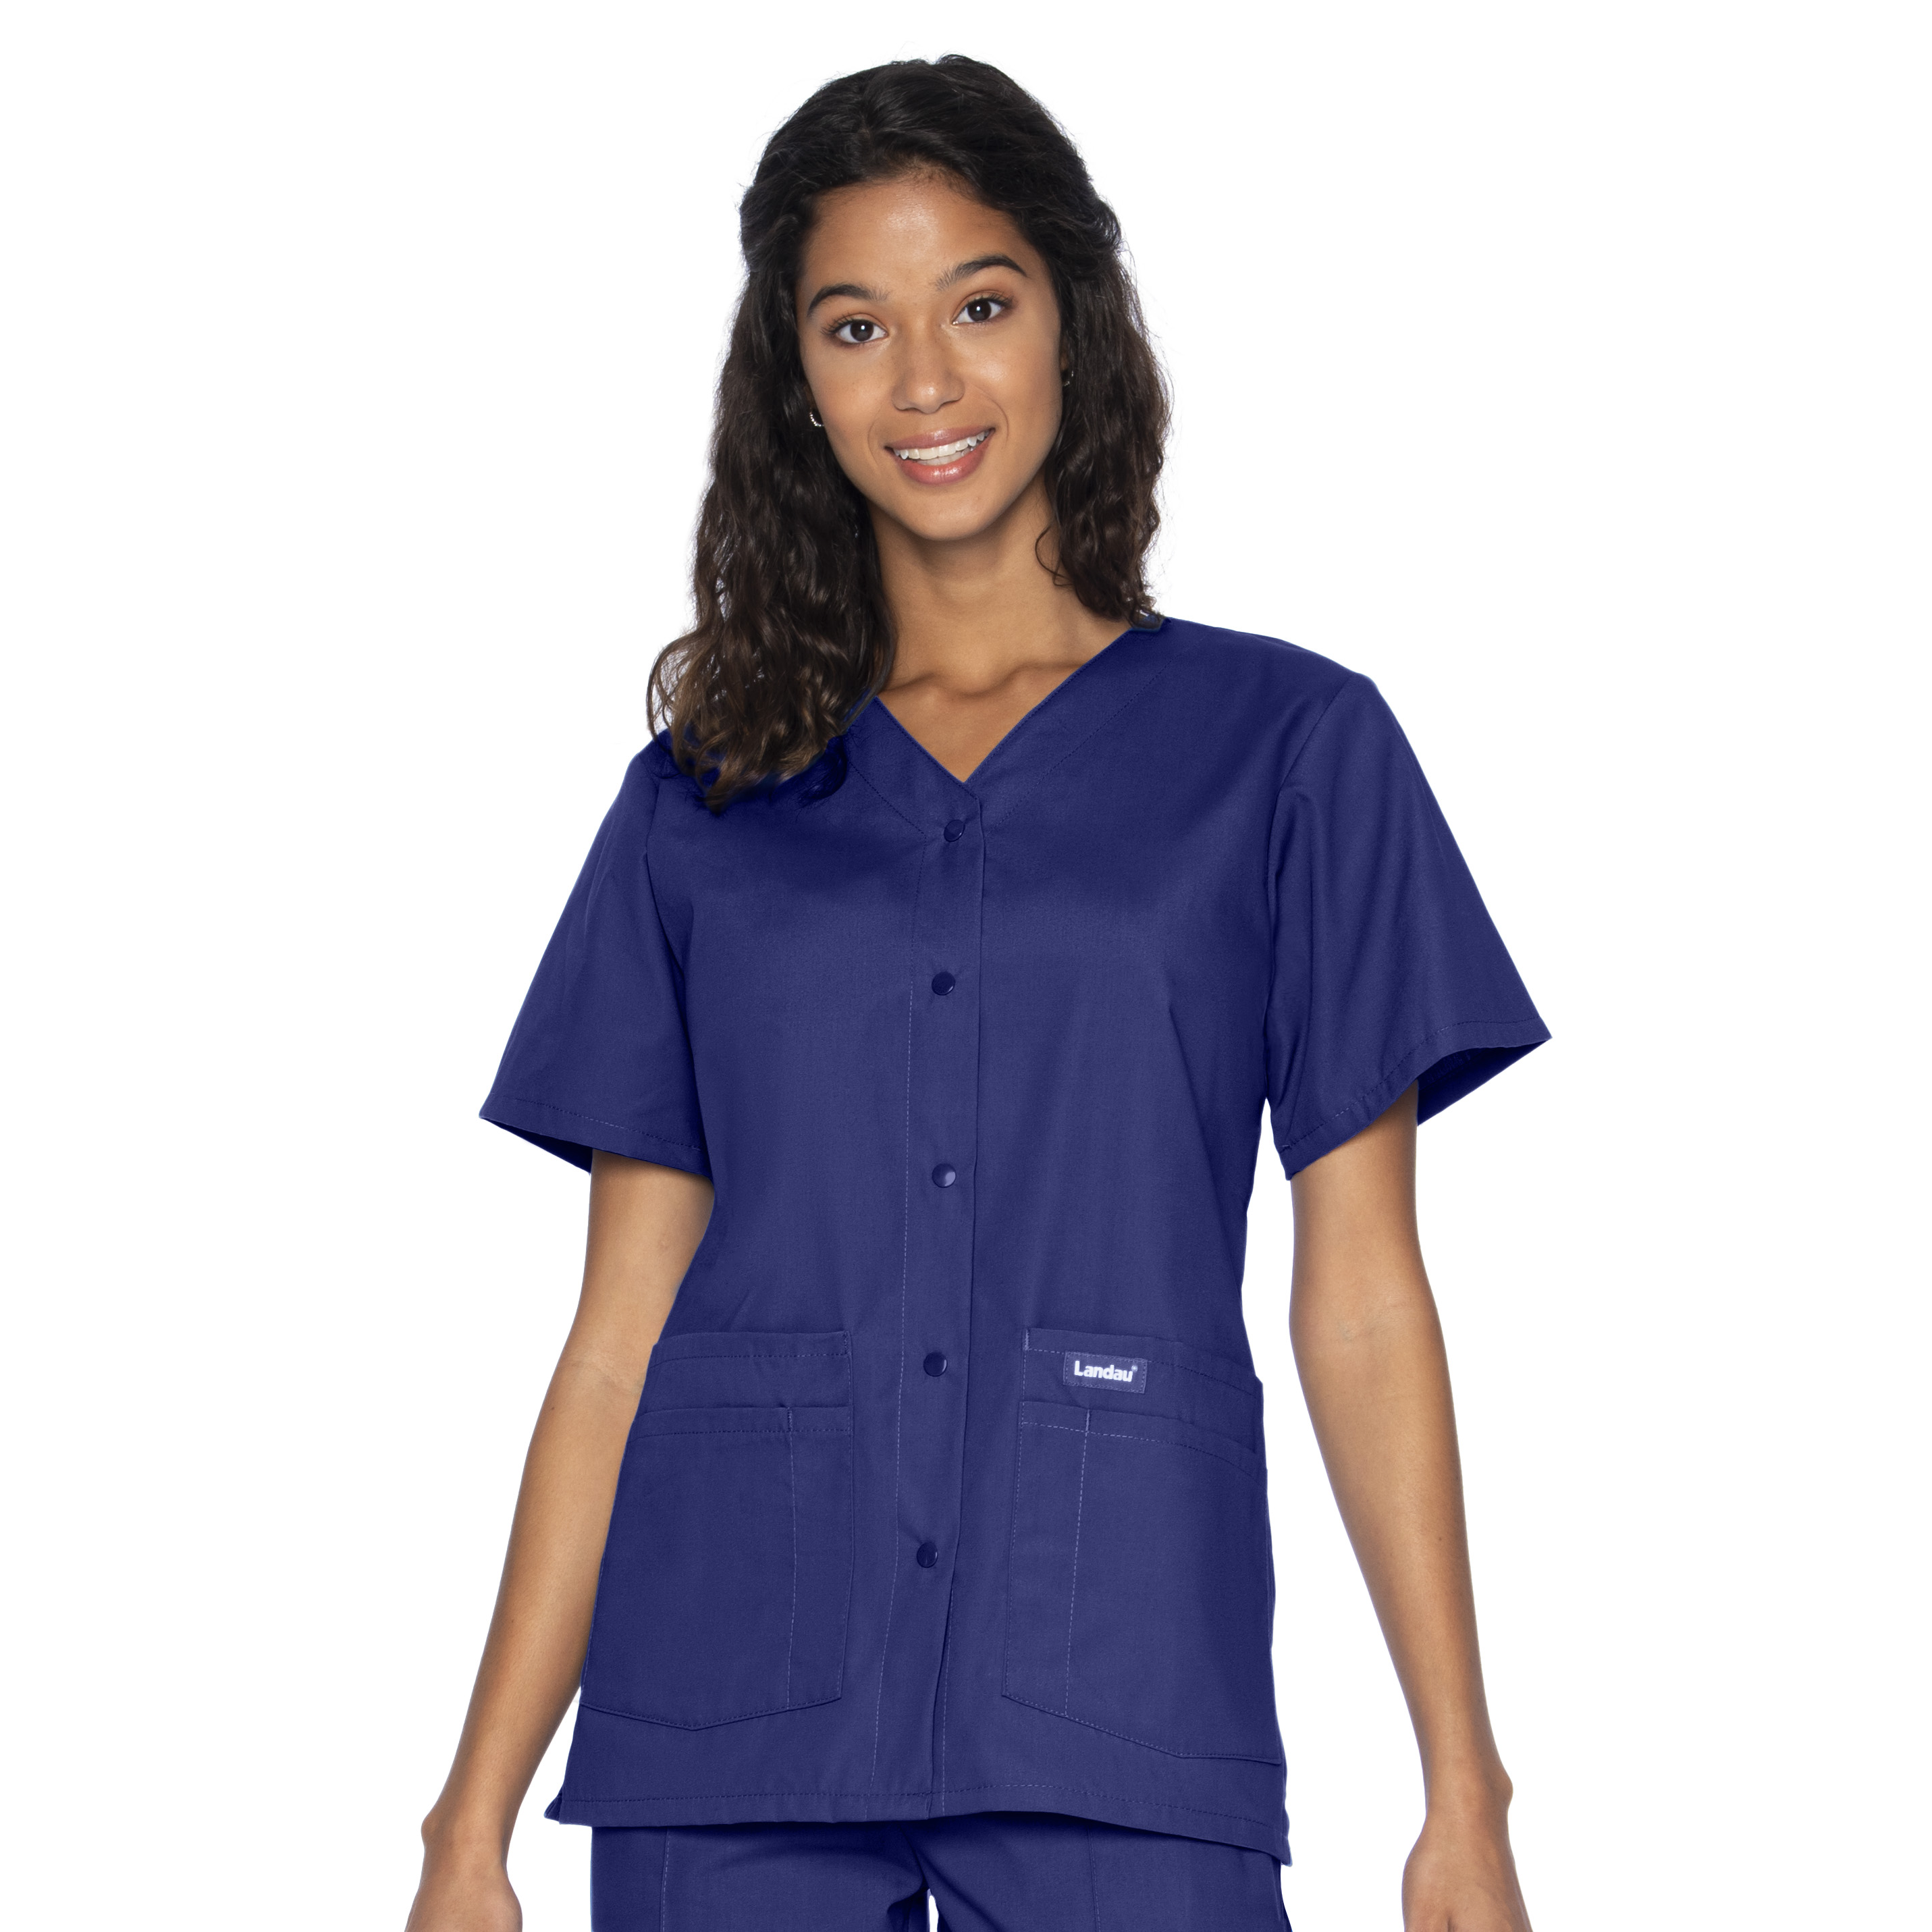 Does the 3/4 sleeve scrub top by Landau have any pockets?